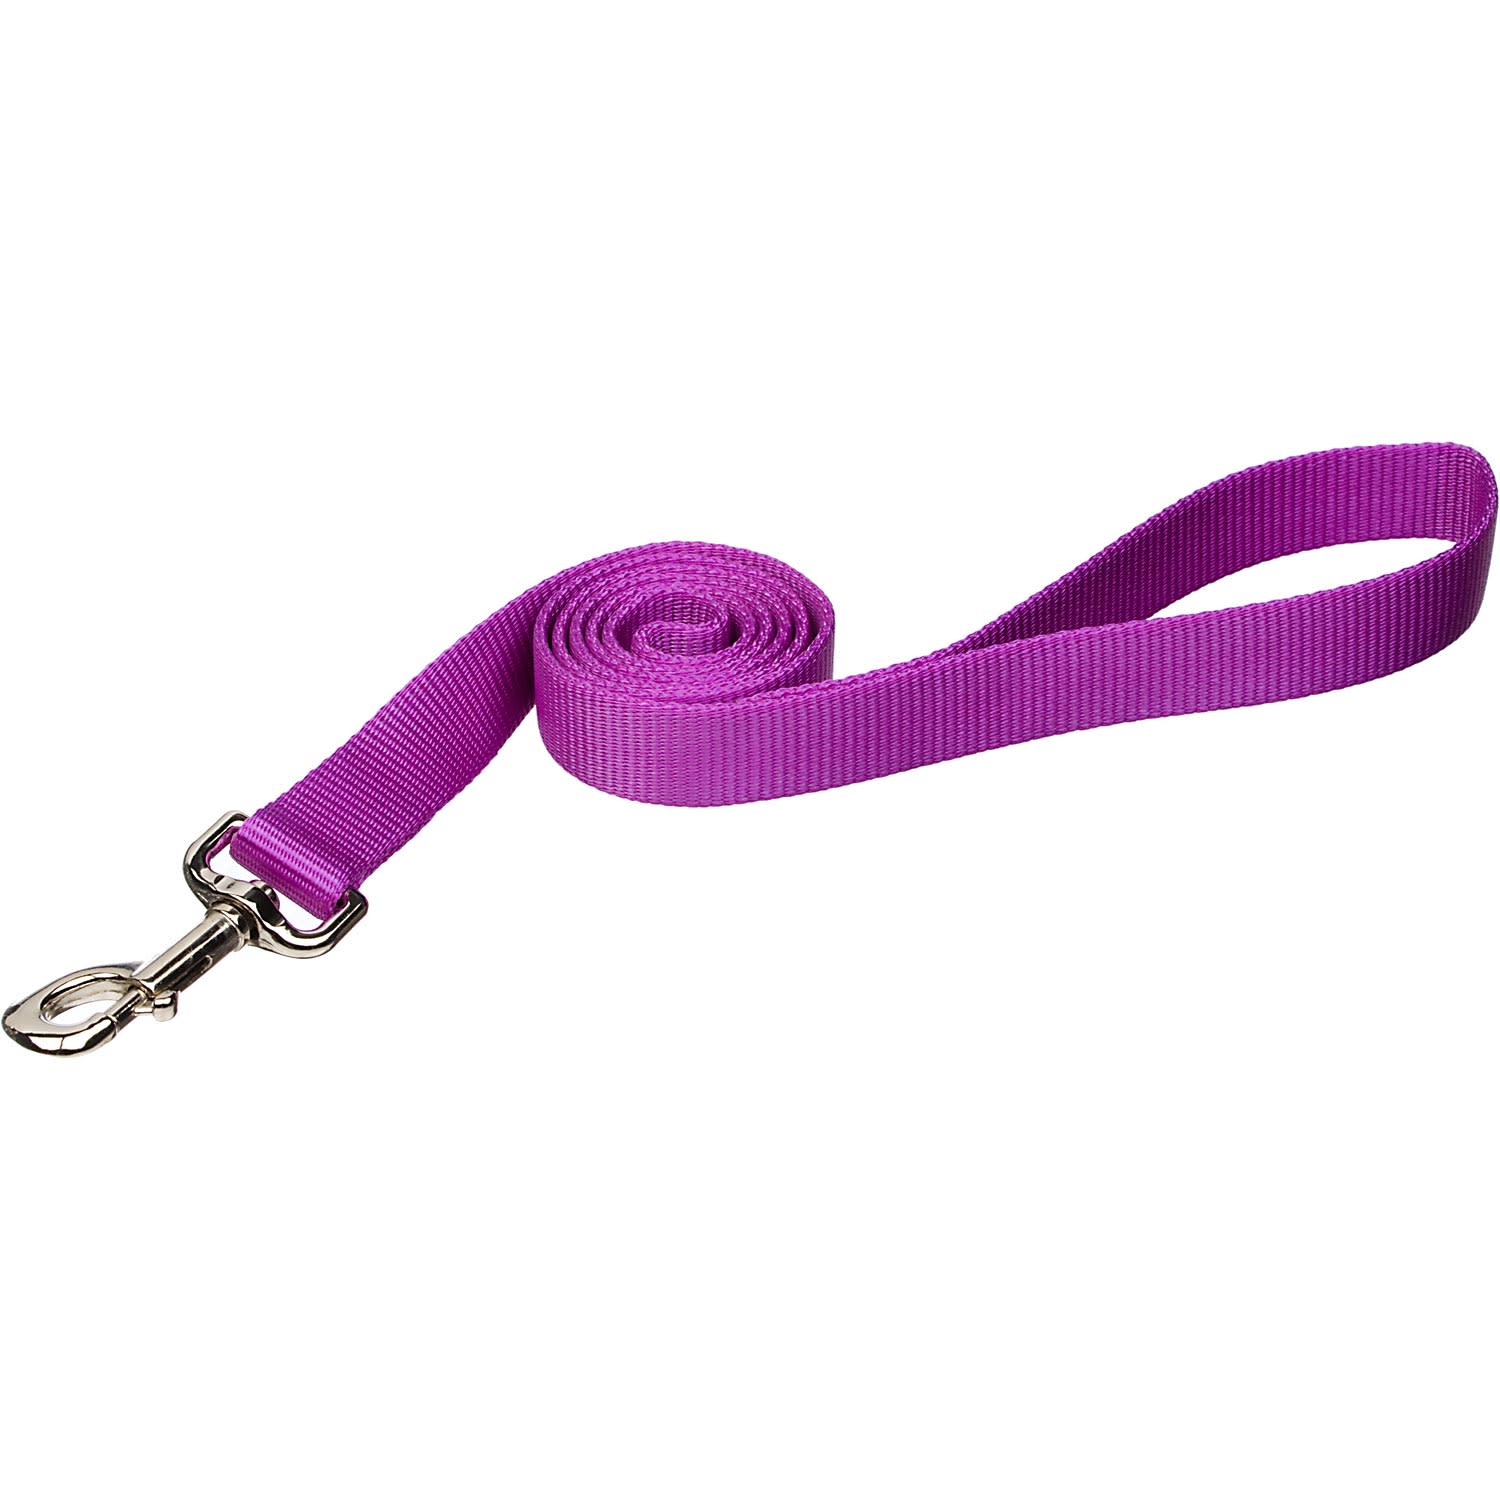 Photos - Collar / Harnesses Coastal Pet Nylon Personalized Dog Leash in Orchid, 4' L X 5/8 